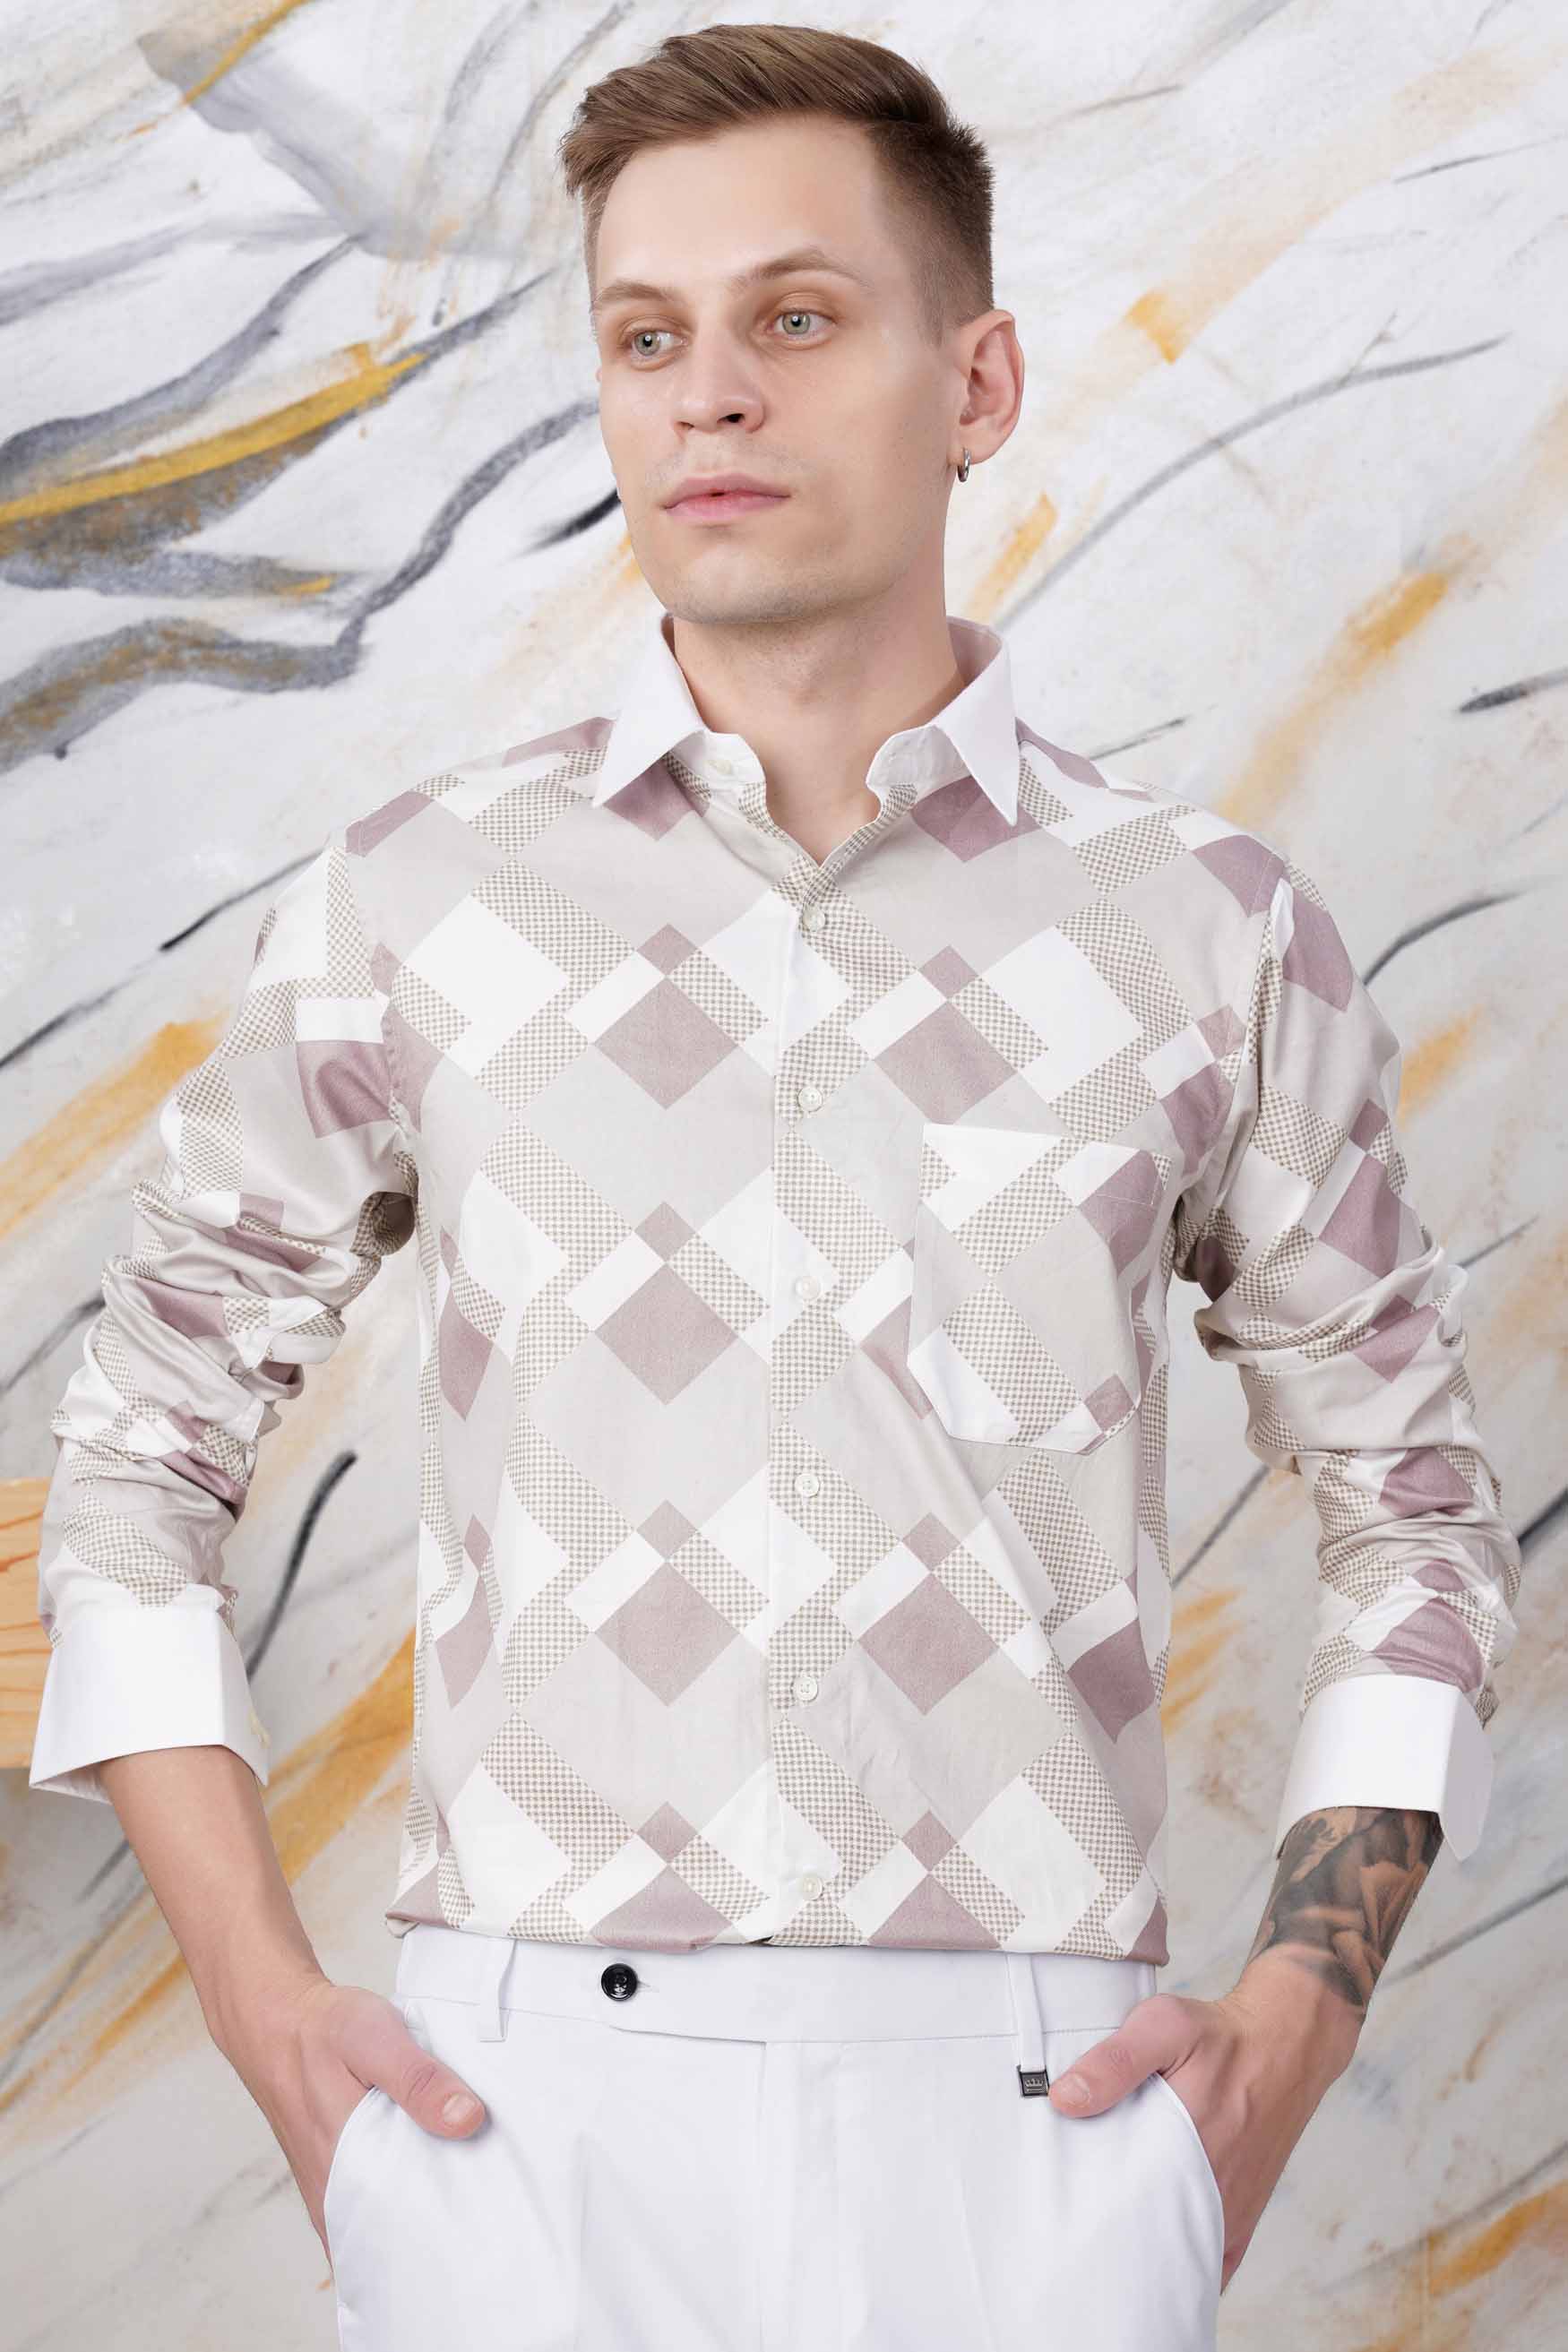 Ghost Gray and Blossom Pink Printed with White Cuffs and Collar Subtle Sheen Super Soft Premium Cotton Shirt